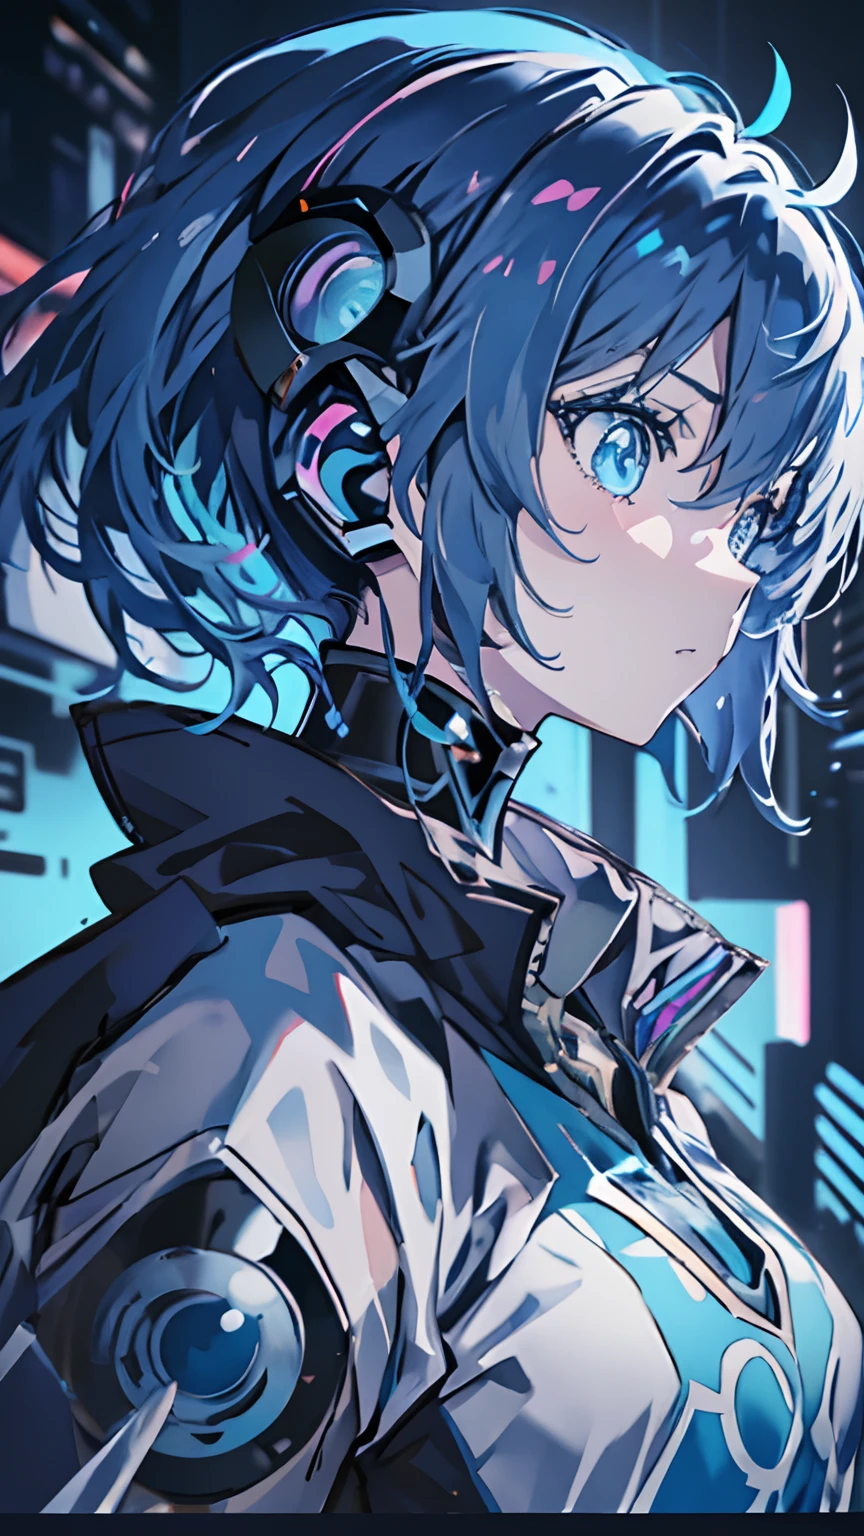 (anime girl with blue eyes), best anime 4k konachan wallpaper, with glowing blue eyes, anime robotic mixed with organic,blue cyborg eyes, anime cyborg, cyberpunk anime girl mech, mecha asthetic, his eyes glowing blue, a teen biopunk cyborg, anime manga robot!! anime girl, metal and glowing eyes, (zoom:1.5), cool expression, face in profile